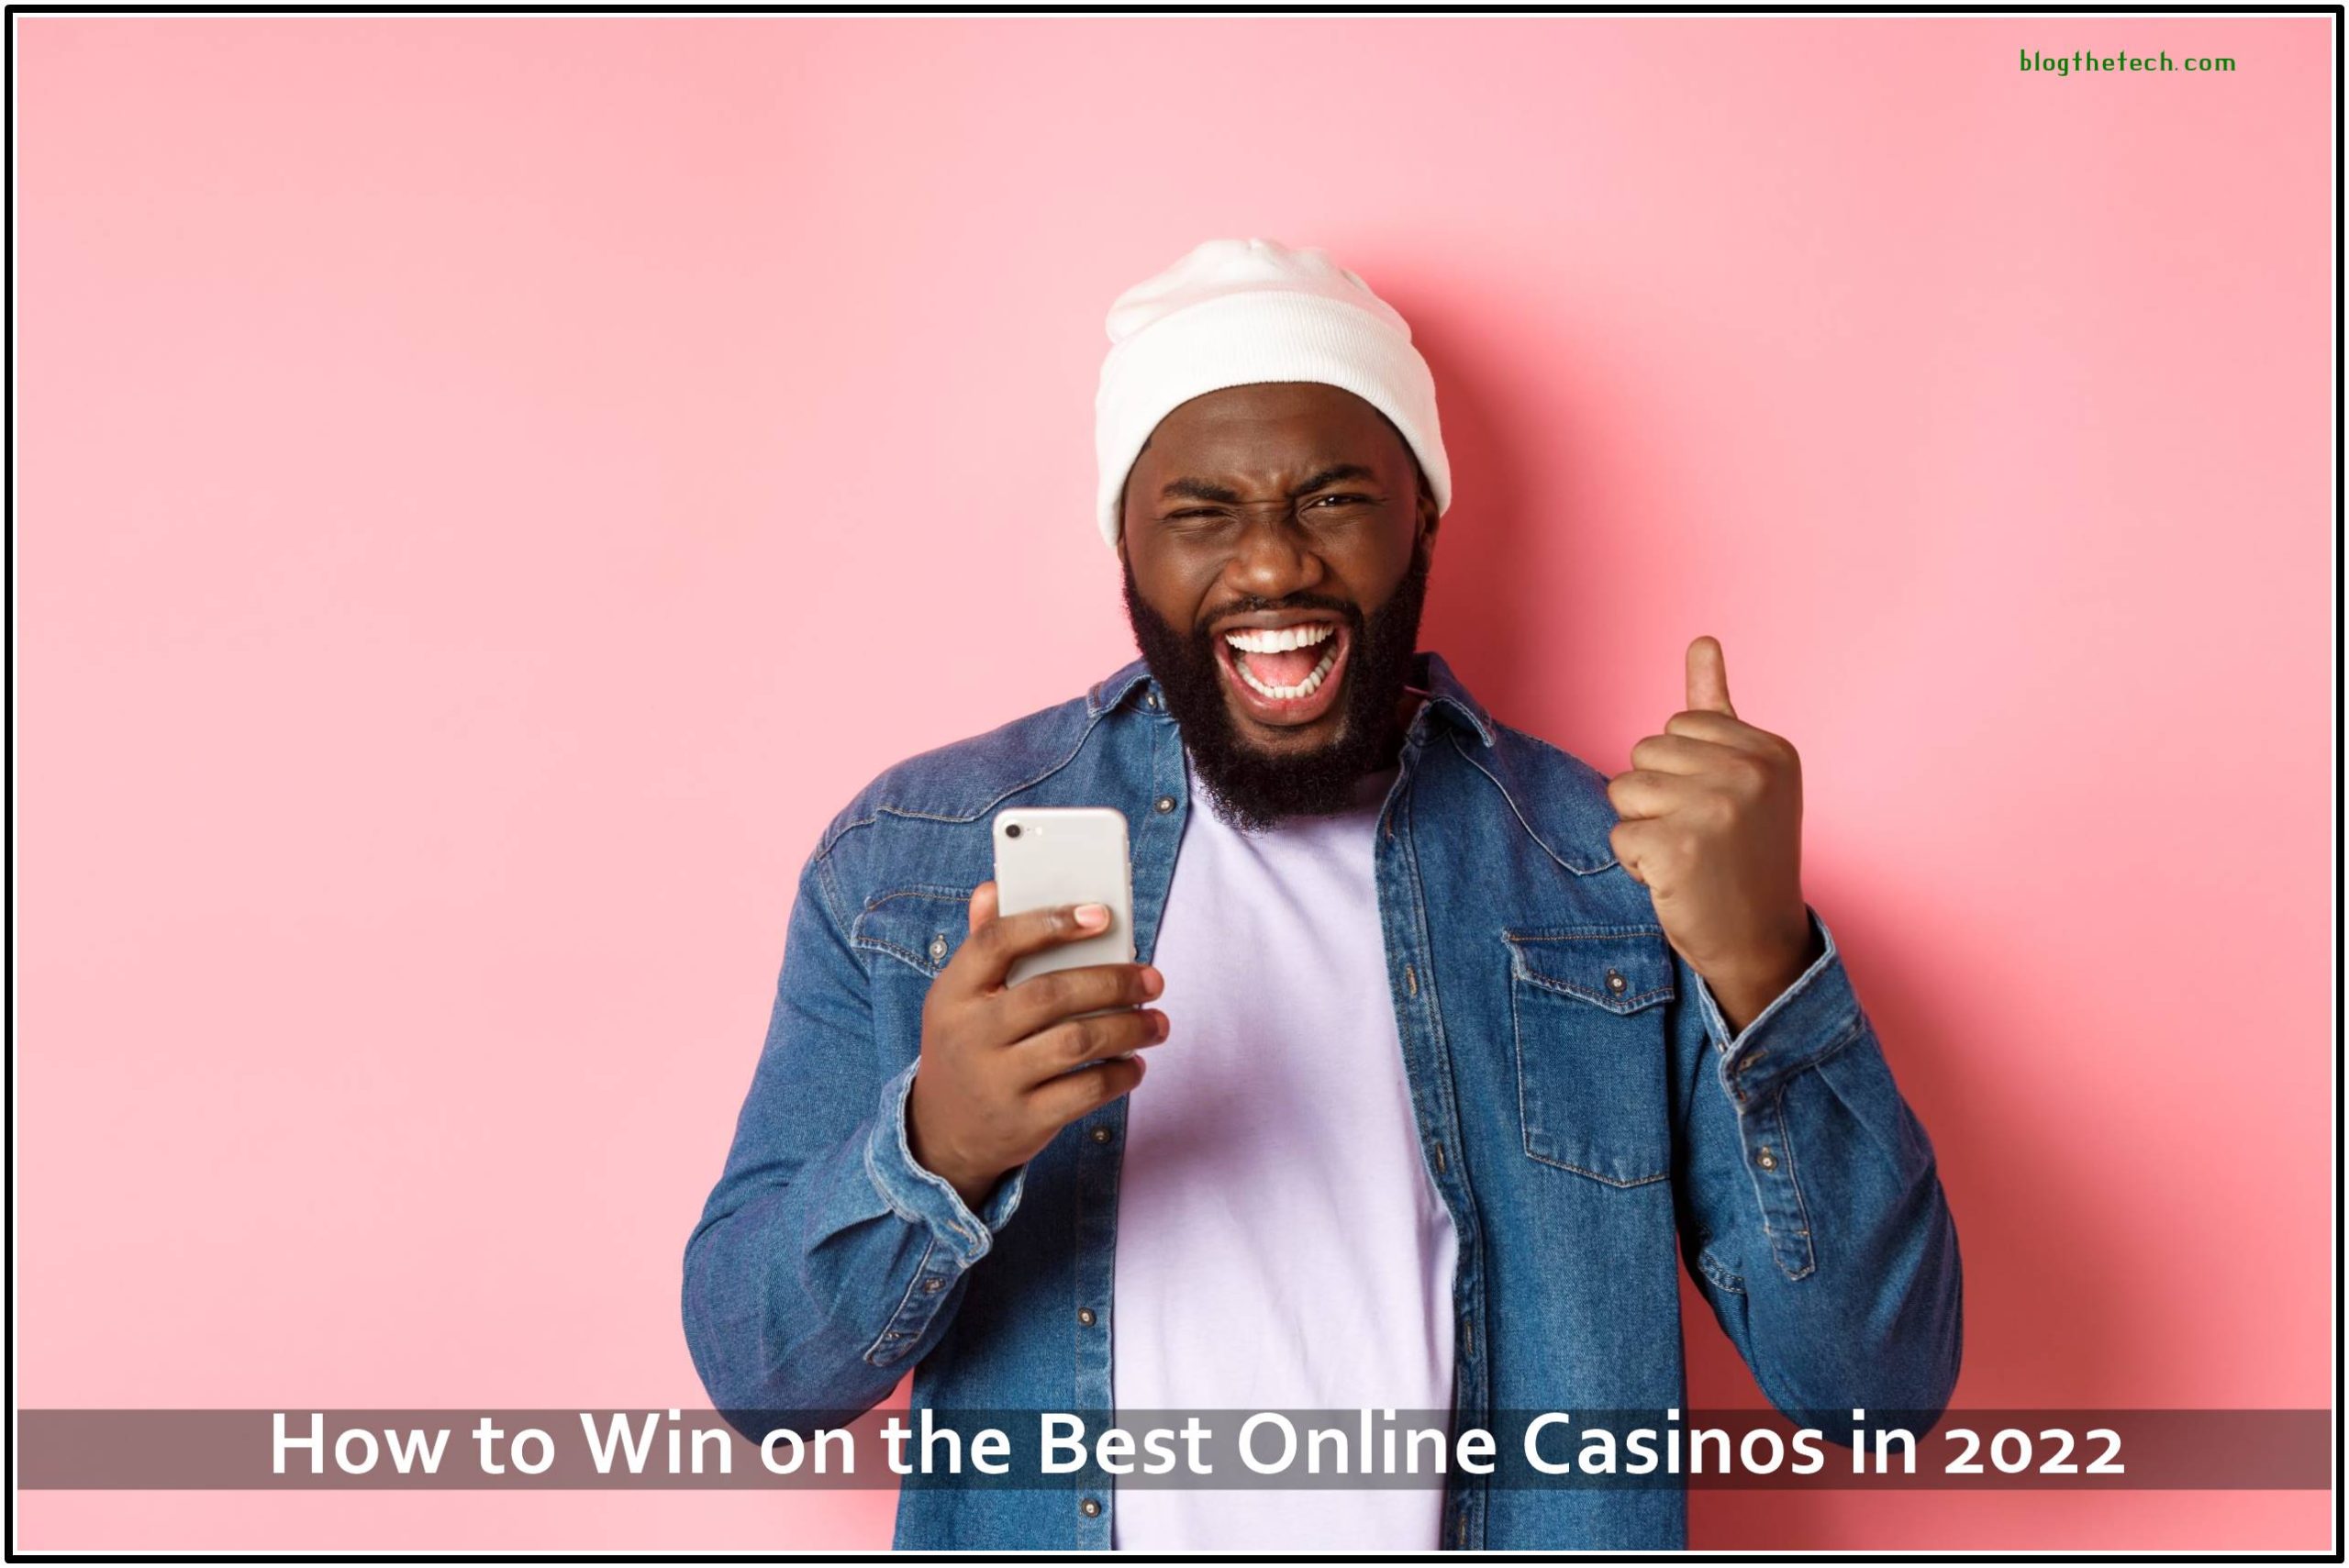 How to Win on the Best Online Casinos in 2022